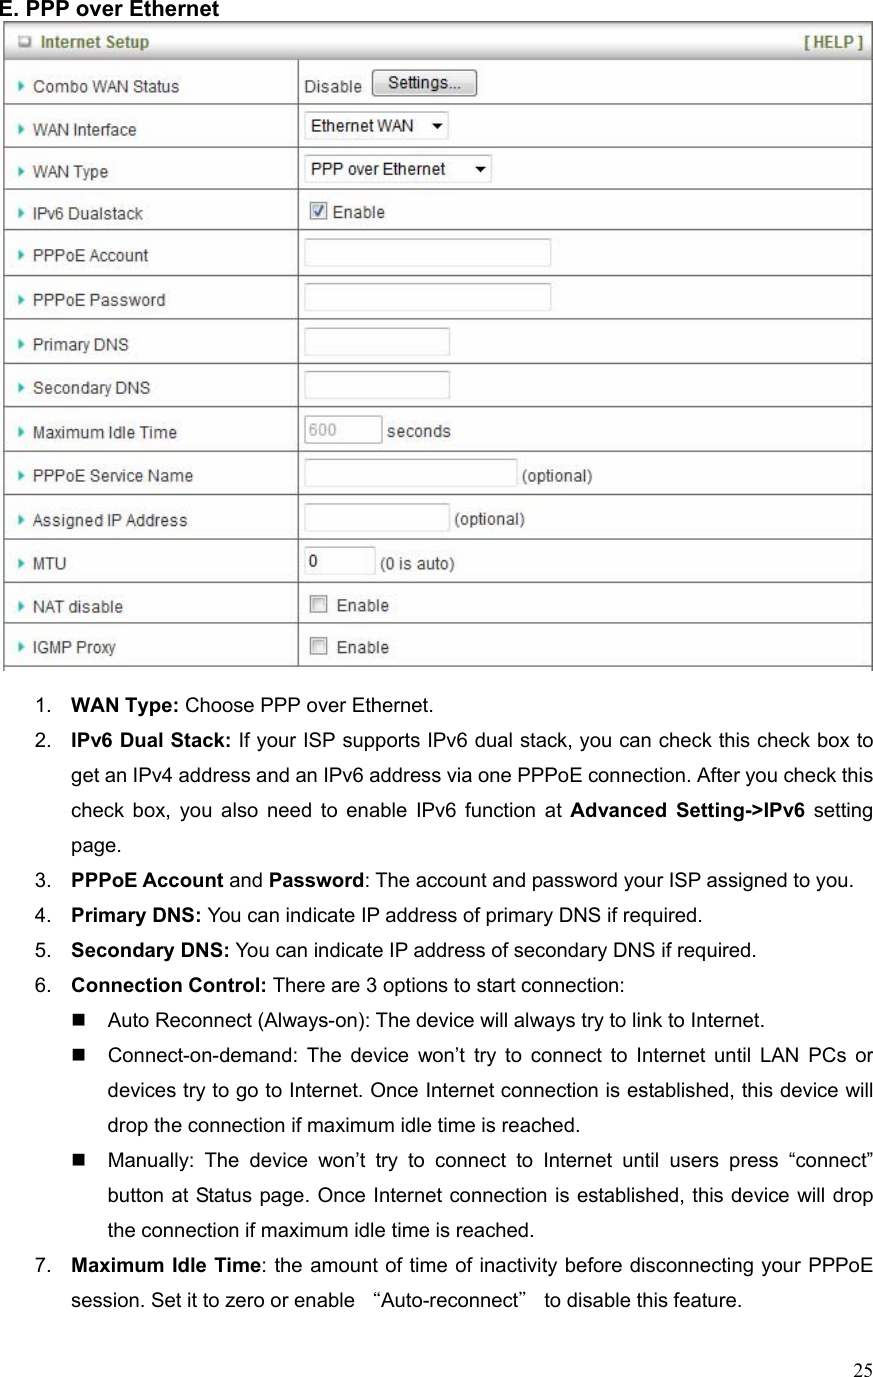  25E. PPP over Ethernet   1.  WAN Type: Choose PPP over Ethernet. 2.  IPv6 Dual Stack: If your ISP supports IPv6 dual stack, you can check this check box to get an IPv4 address and an IPv6 address via one PPPoE connection. After you check this check box, you also need to enable IPv6 function at Advanced Setting-&gt;IPv6 setting page. 3.  PPPoE Account and Password: The account and password your ISP assigned to you.   4.  Primary DNS: You can indicate IP address of primary DNS if required. 5.  Secondary DNS: You can indicate IP address of secondary DNS if required. 6.  Connection Control: There are 3 options to start connection:     Auto Reconnect (Always-on): The device will always try to link to Internet.       Connect-on-demand: The device won’t try to connect to Internet until LAN PCs or devices try to go to Internet. Once Internet connection is established, this device will drop the connection if maximum idle time is reached.   Manually: The device won’t try to connect to Internet until users press “connect” button at Status page. Once Internet connection is established, this device will drop the connection if maximum idle time is reached. 7.  Maximum Idle Time: the amount of time of inactivity before disconnecting your PPPoE session. Set it to zero or enable “Auto-reconnect＂ to disable this feature.   